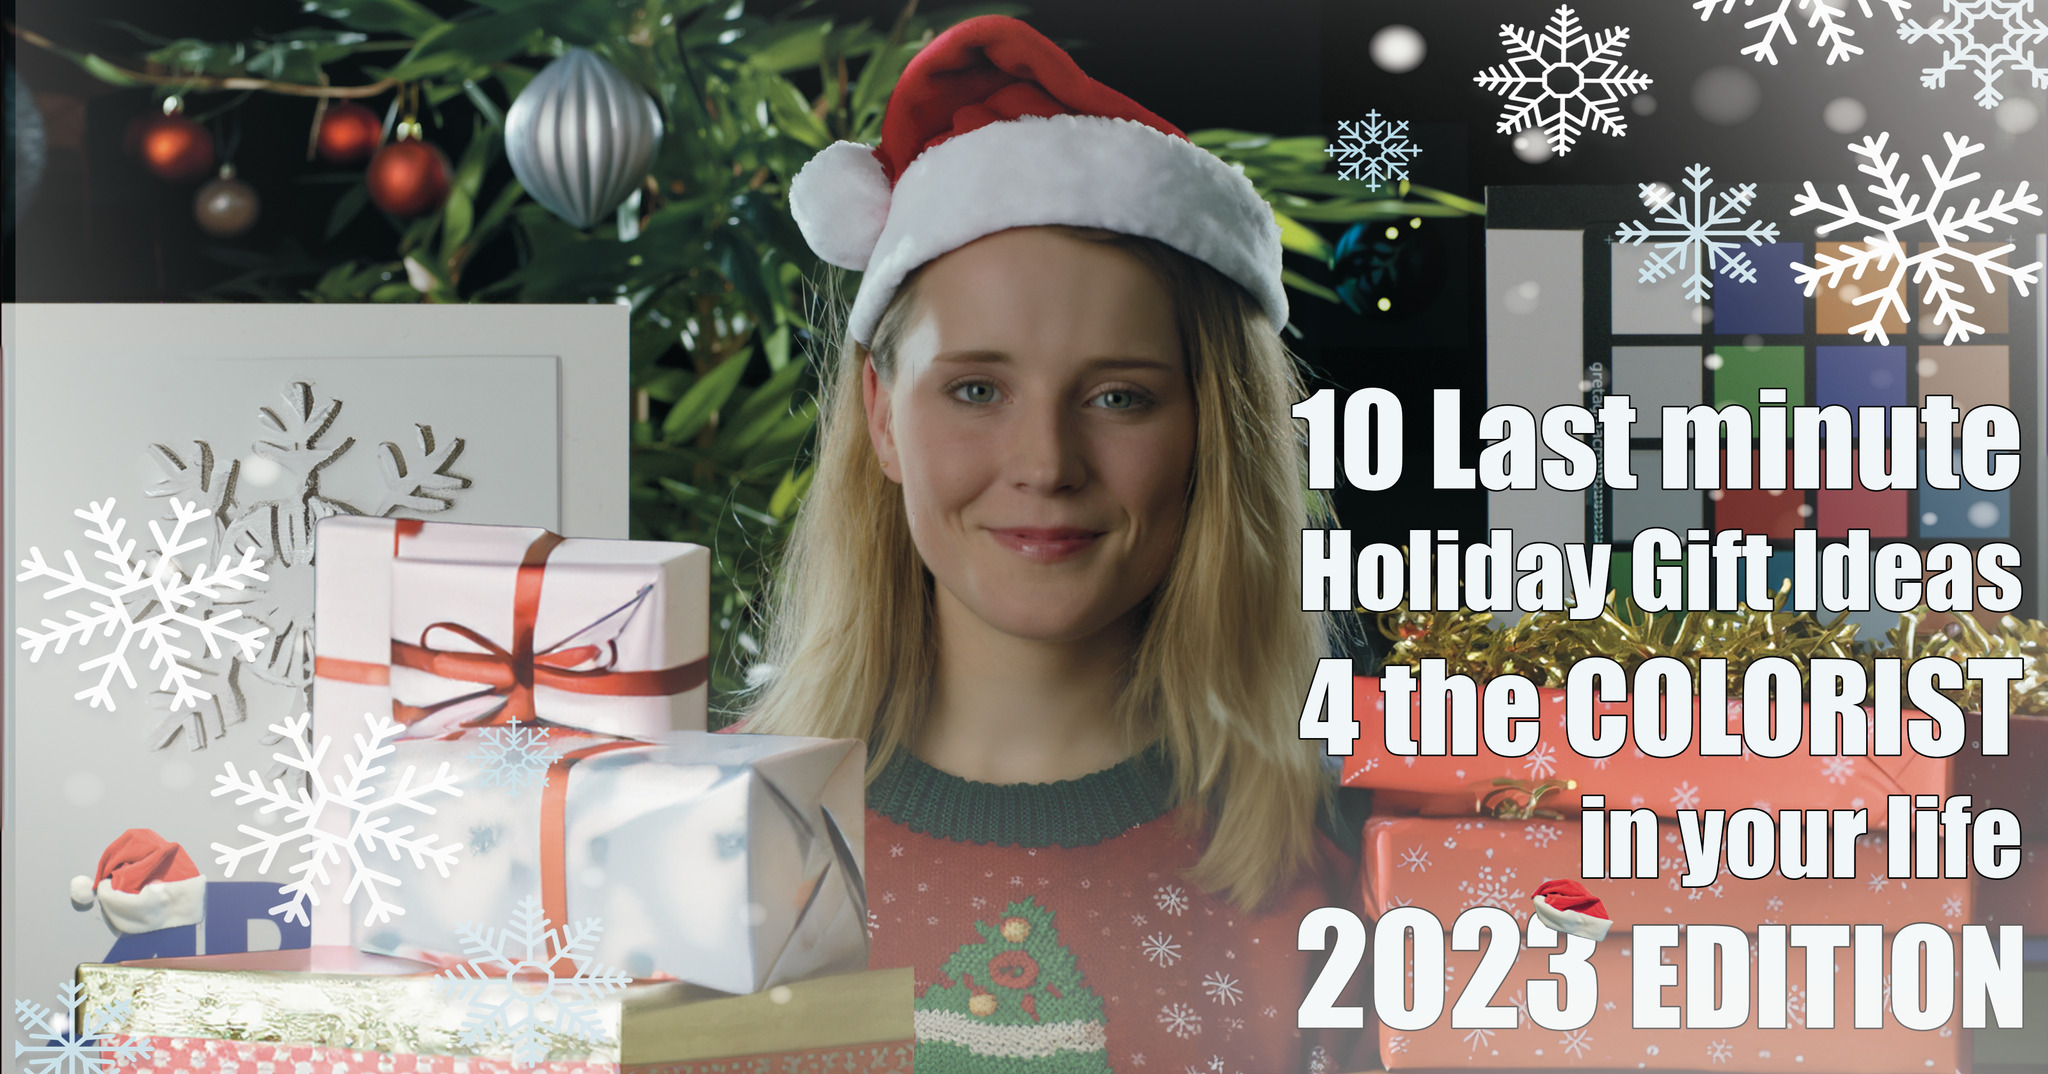 12 Last minute Holiday Gifts and Stocking Stuffers for the Colorist in your life - the 2023 edition.  16